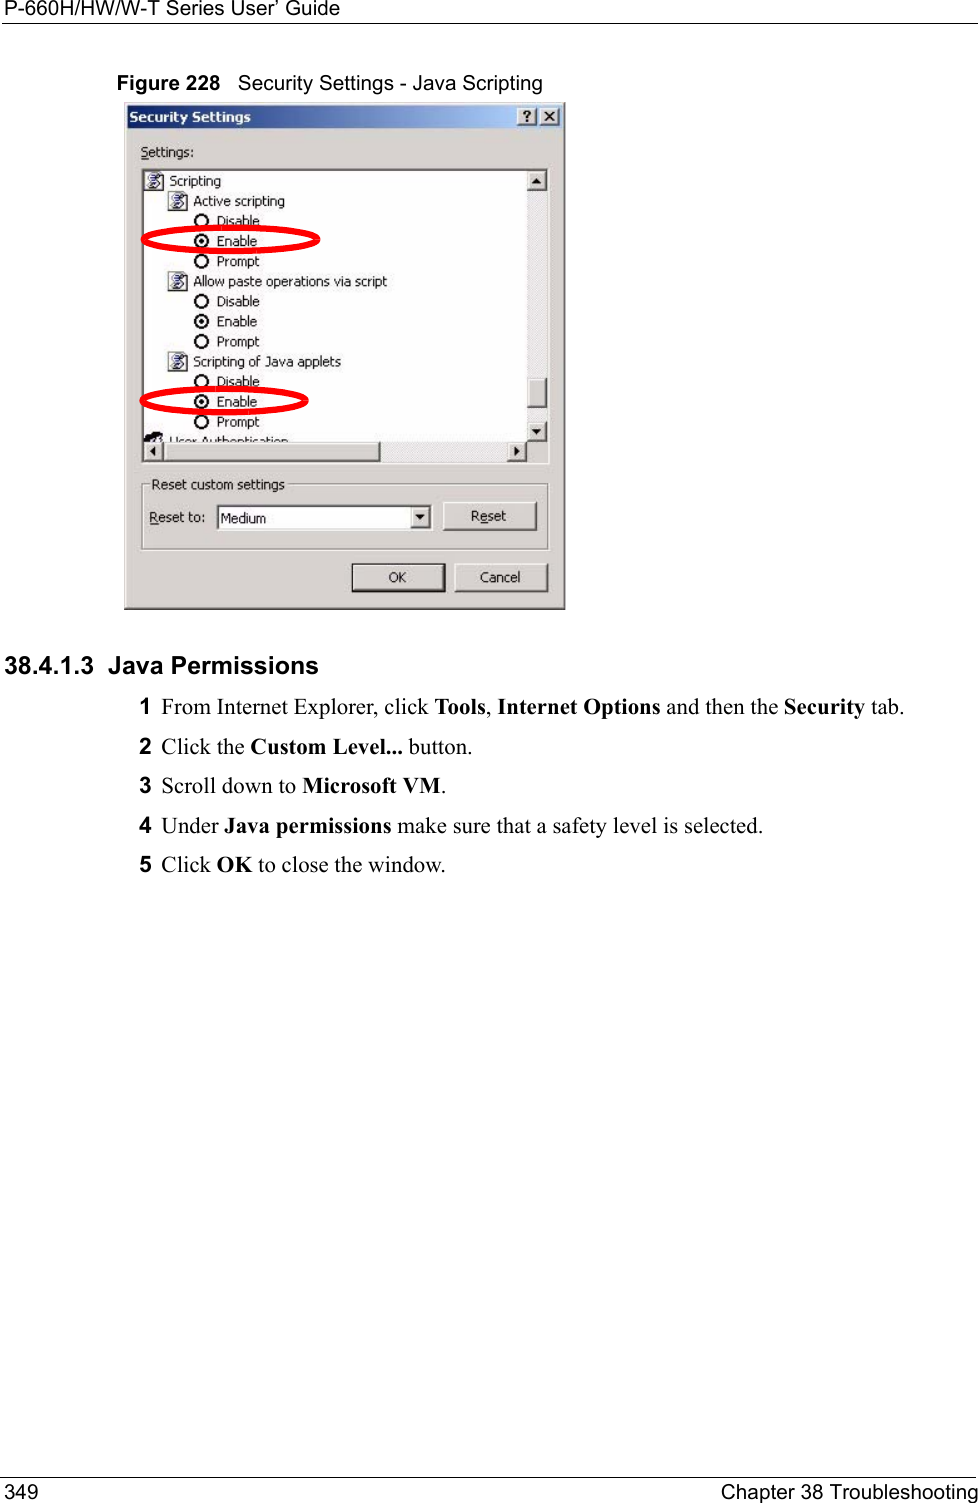 P-660H/HW/W-T Series User’ Guide349 Chapter 38 TroubleshootingFigure 228   Security Settings - Java Scripting38.4.1.3  Java Permissions1From Internet Explorer, click Tools, Internet Options and then the Security tab. 2Click the Custom Level... button. 3Scroll down to Microsoft VM. 4Under Java permissions make sure that a safety level is selected.5Click OK to close the window.